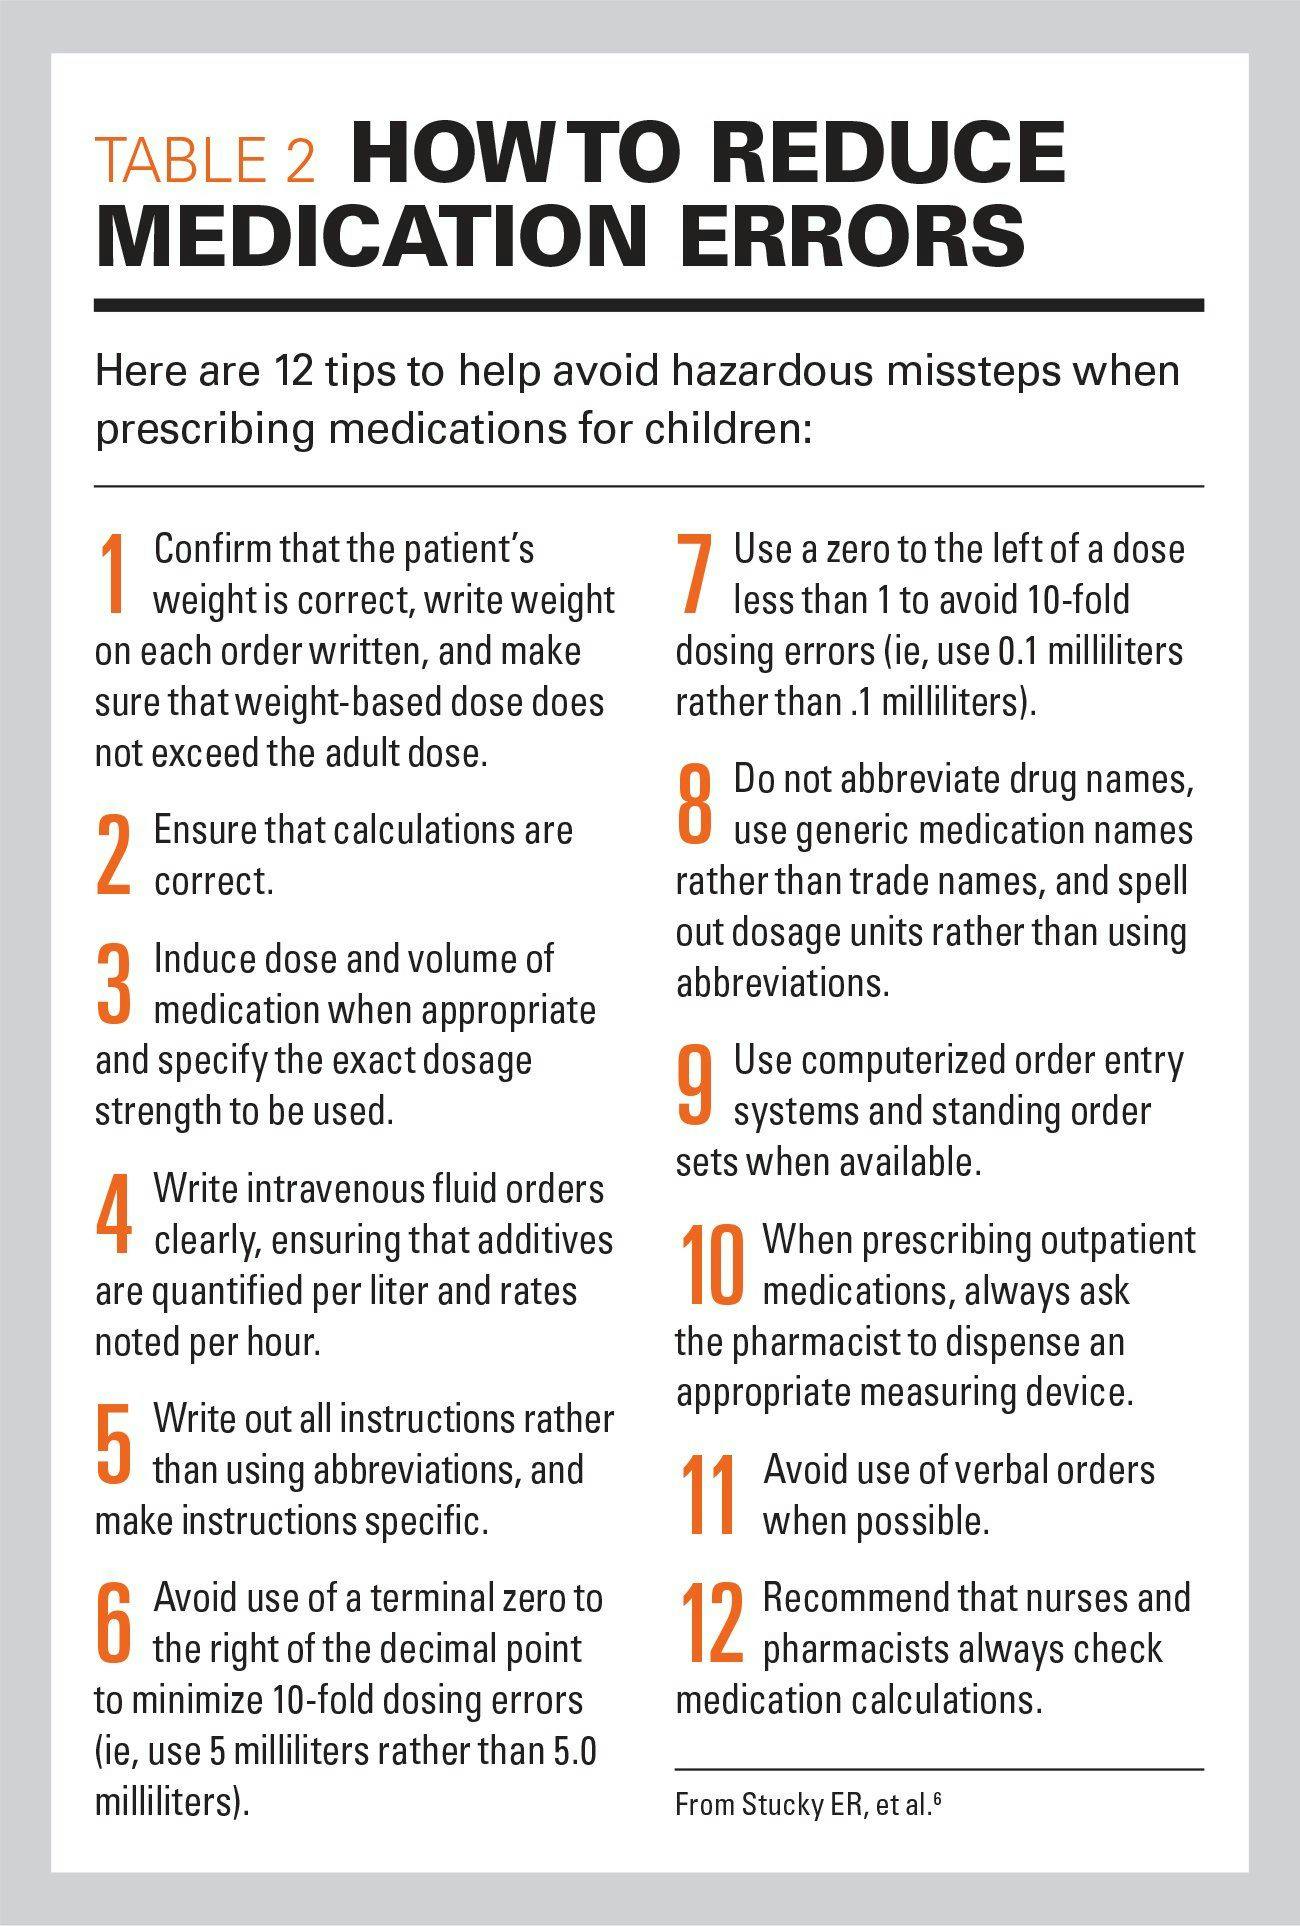 How to reduce medication errors